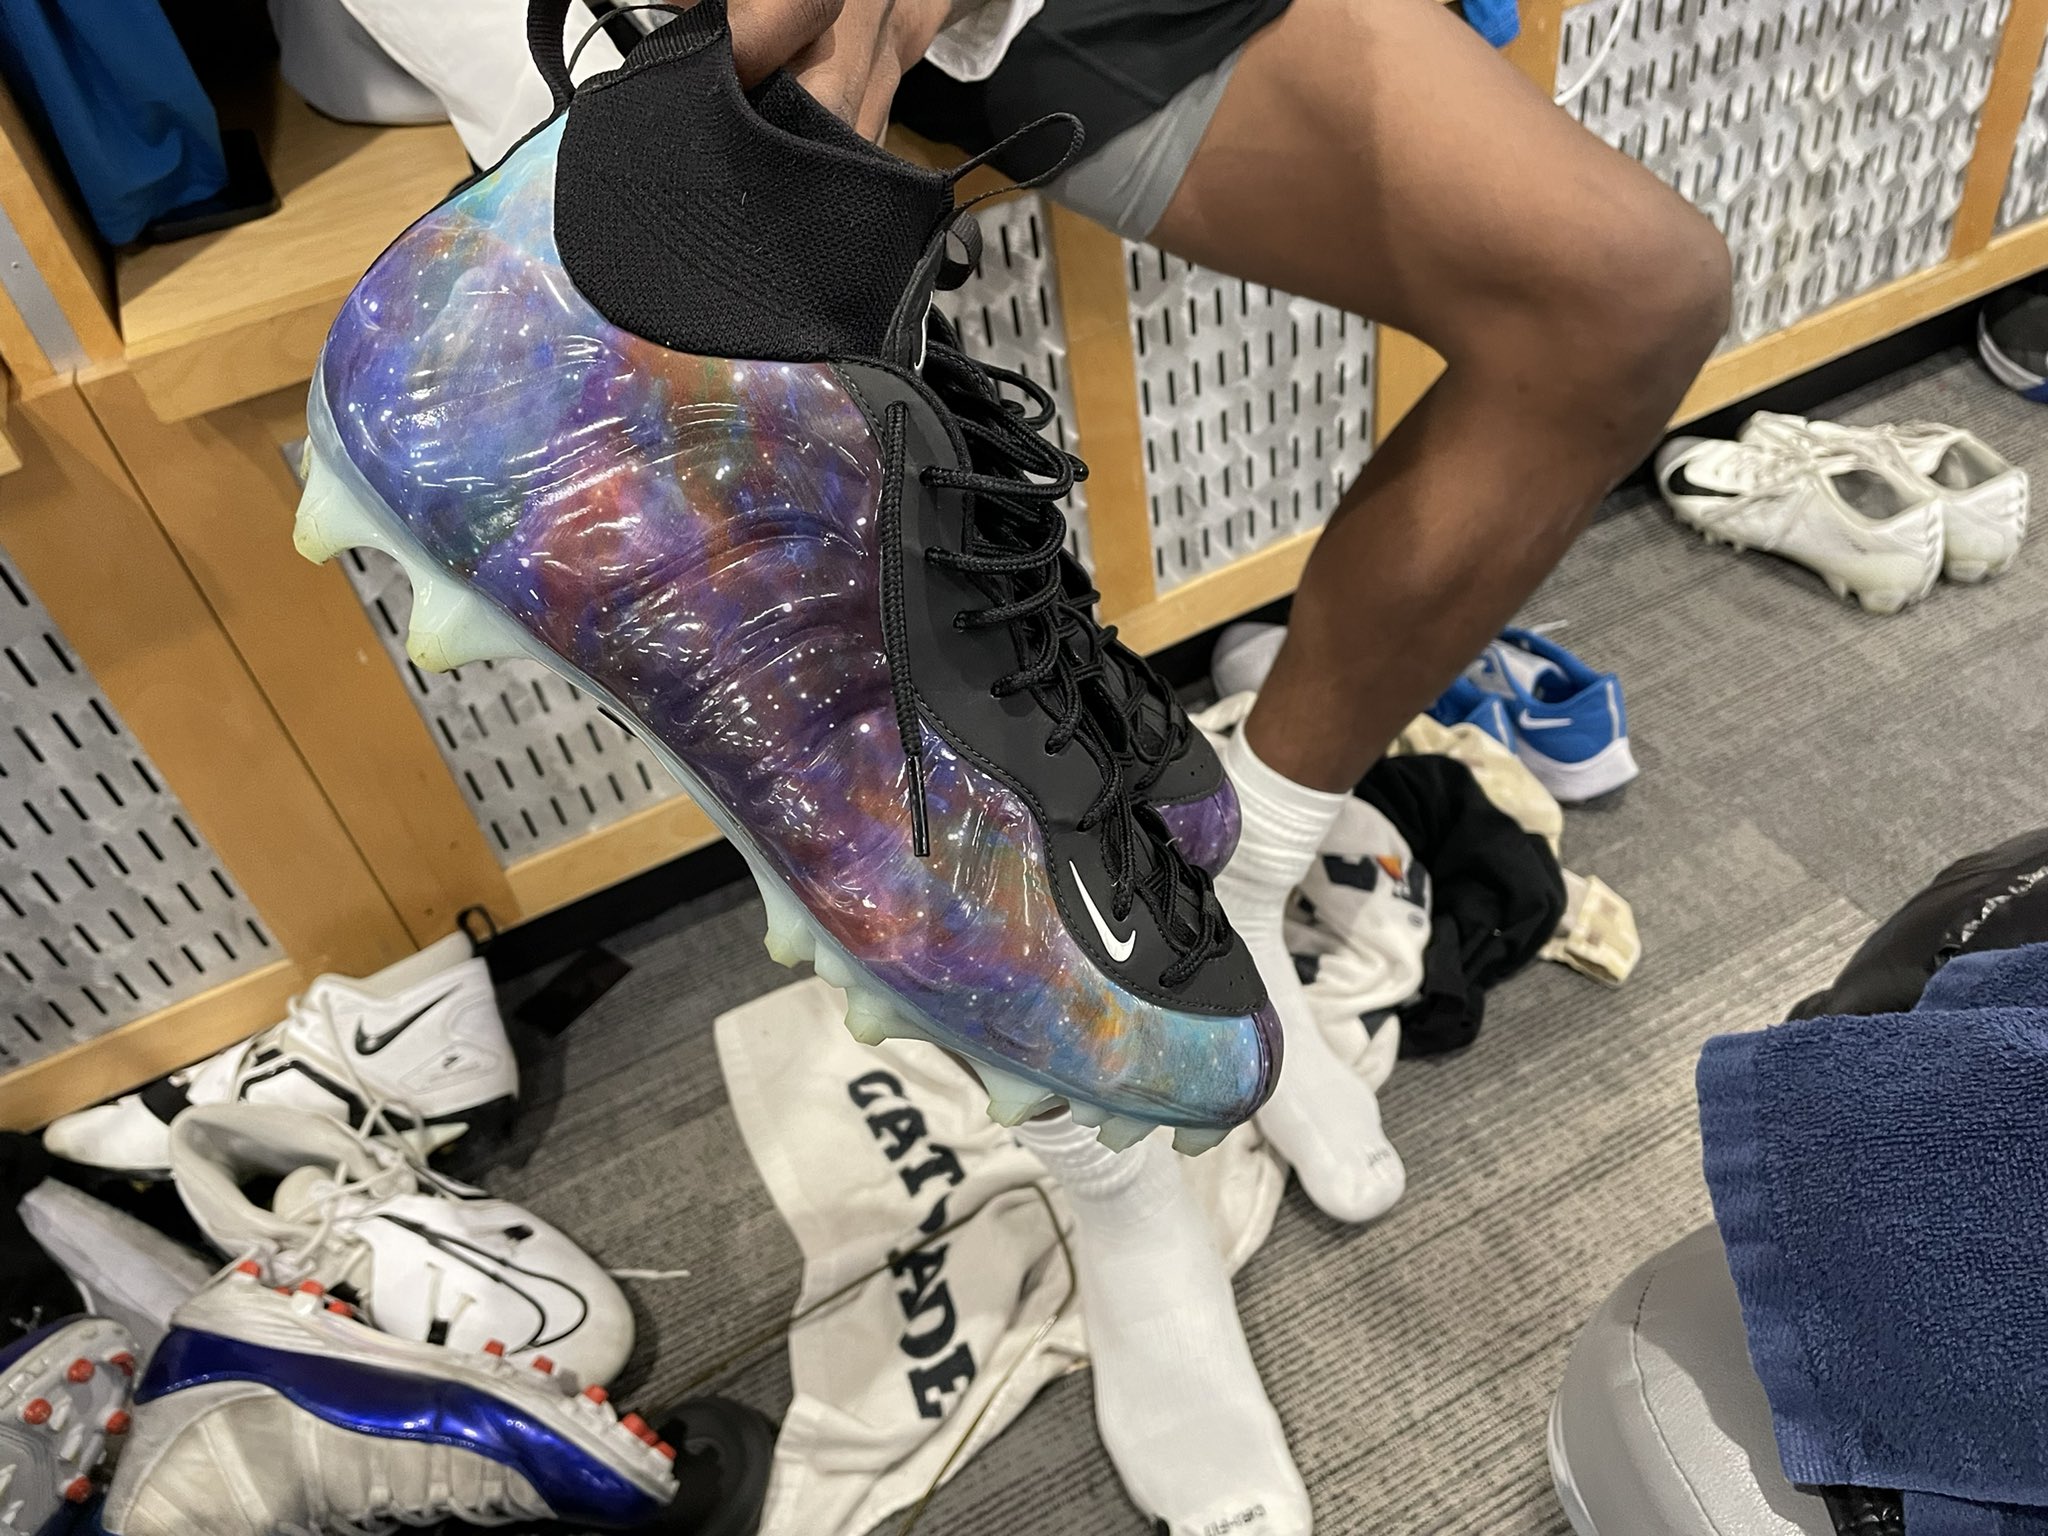 Eric Woodyard on Twitter: "Nike sent over these “Galaxy” Foamposite cleats for #Lions rookie Jameson Williams. https://t.co/y4CfTcRyKi" / Twitter